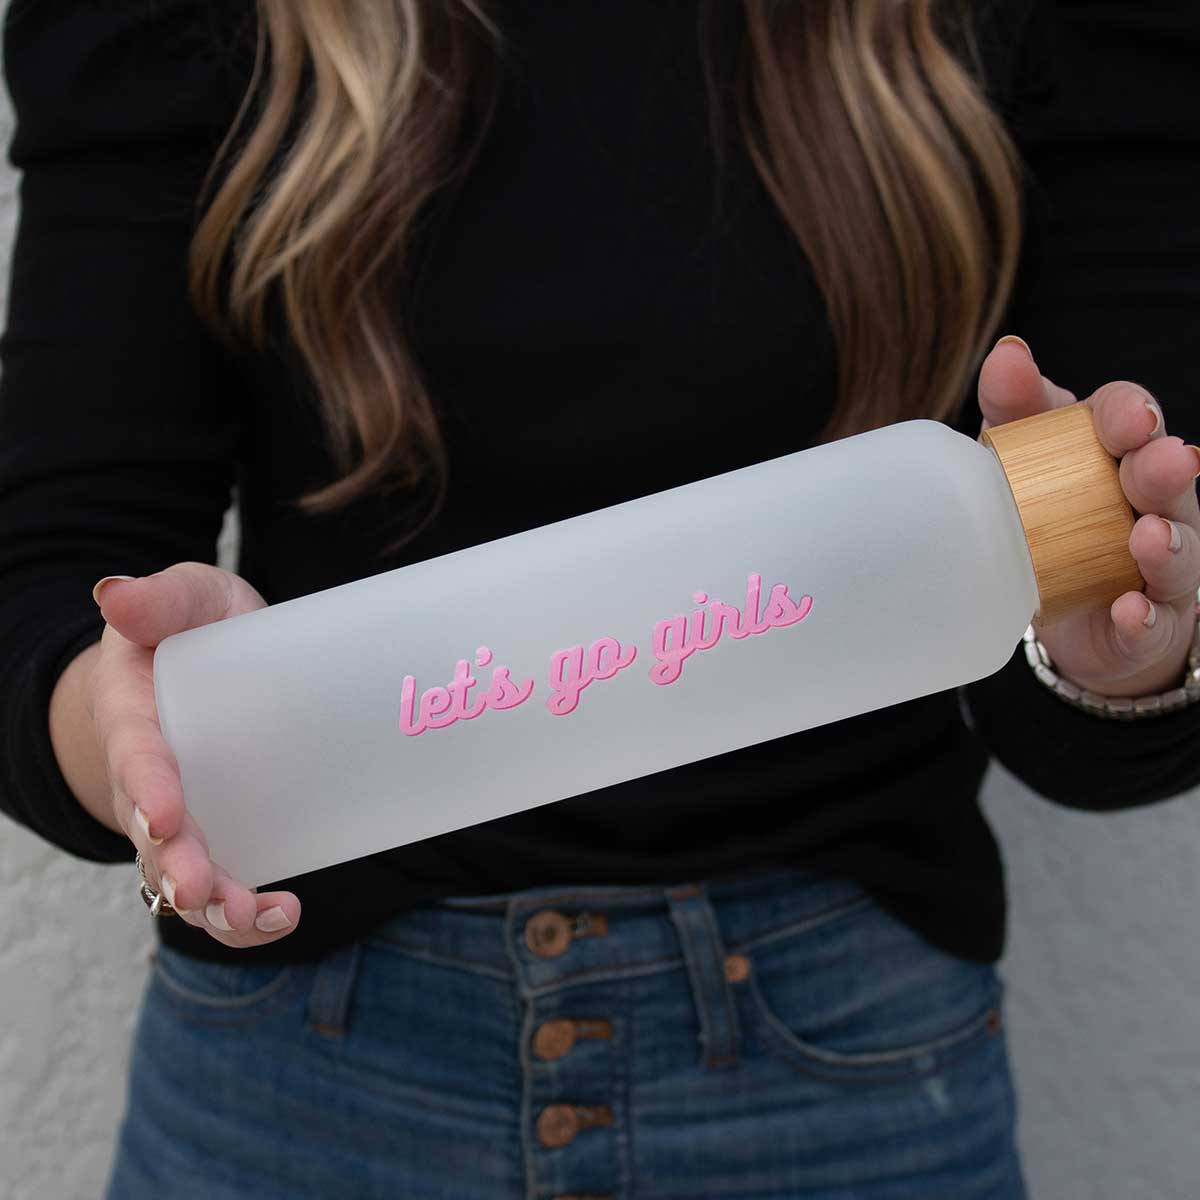 Tumbler for sale that reads "let's go girls"